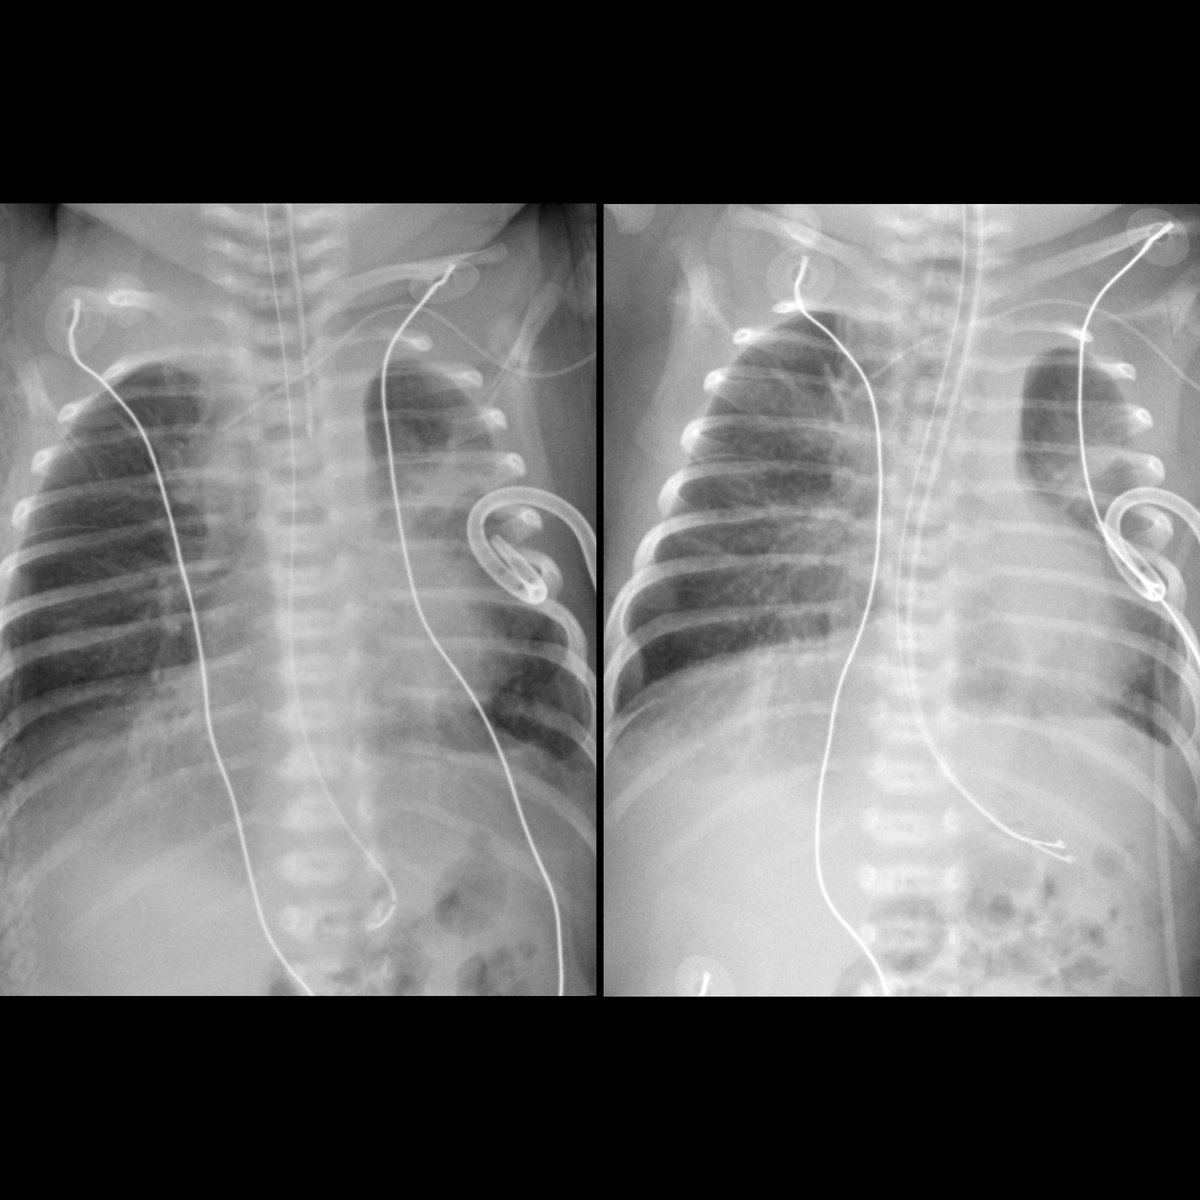 Premature newborn with respiratory distress

CXR(left) shows tip of nasogastric tube to project over body of stomach. Tip of NAVA tube projects over proximal esophagus.

#FOAMed #MedEd #FOAMPed #FOAMRad #PedsRad #RadEd #RadRes #radiology #PedsPulm #NICU #Neonatology #FOAMneo